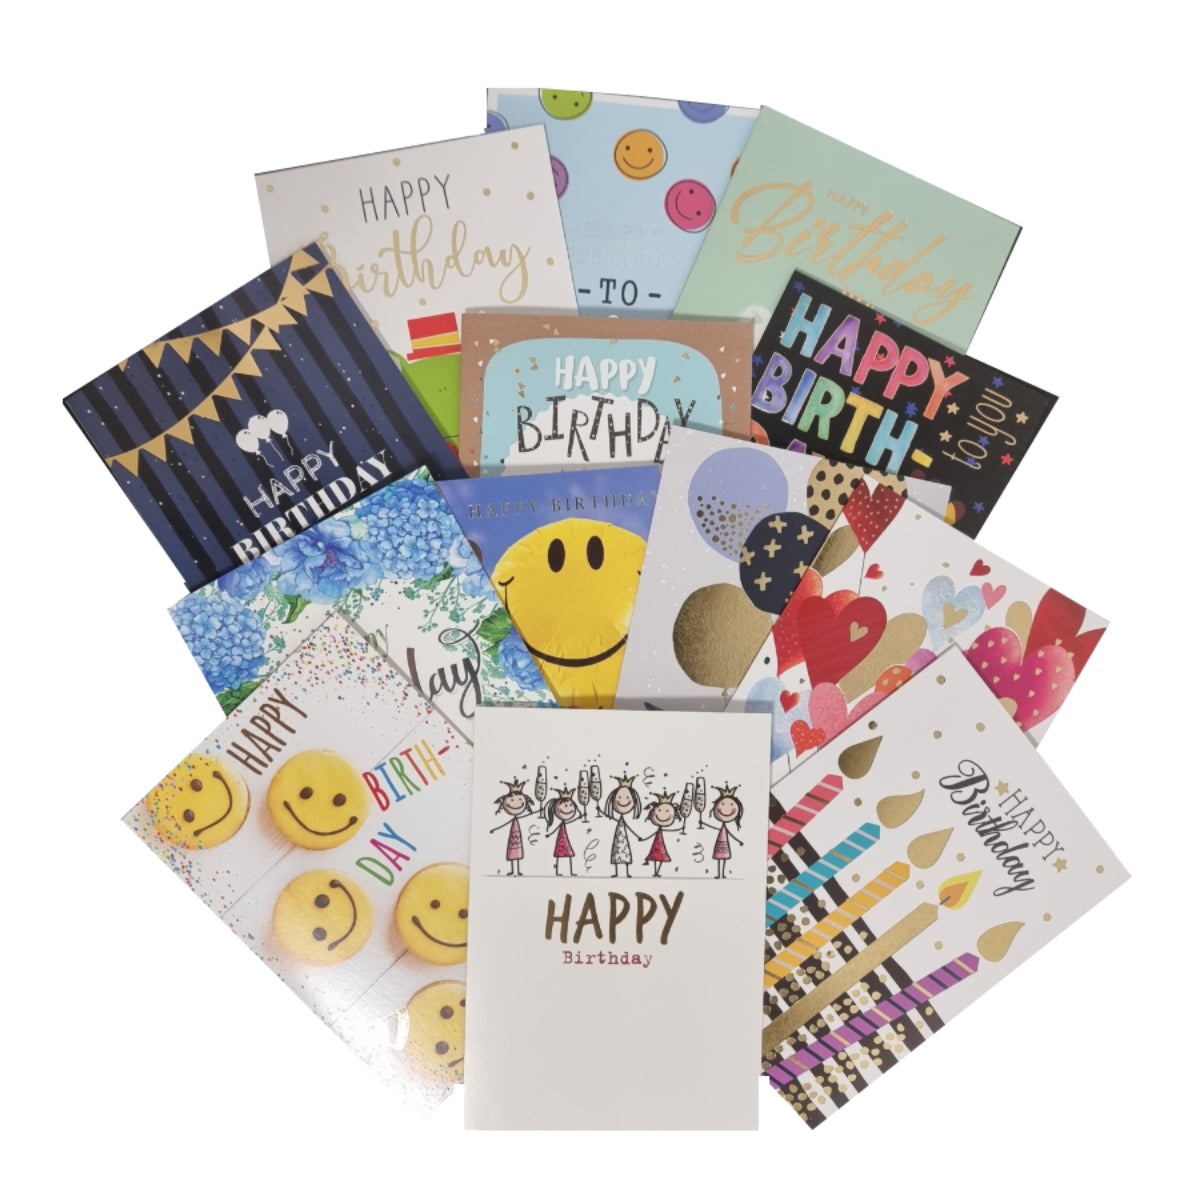 HAPPY BIRTHDAY Card with Envelope, 175 x 125mm, Assorted Designs, per piece